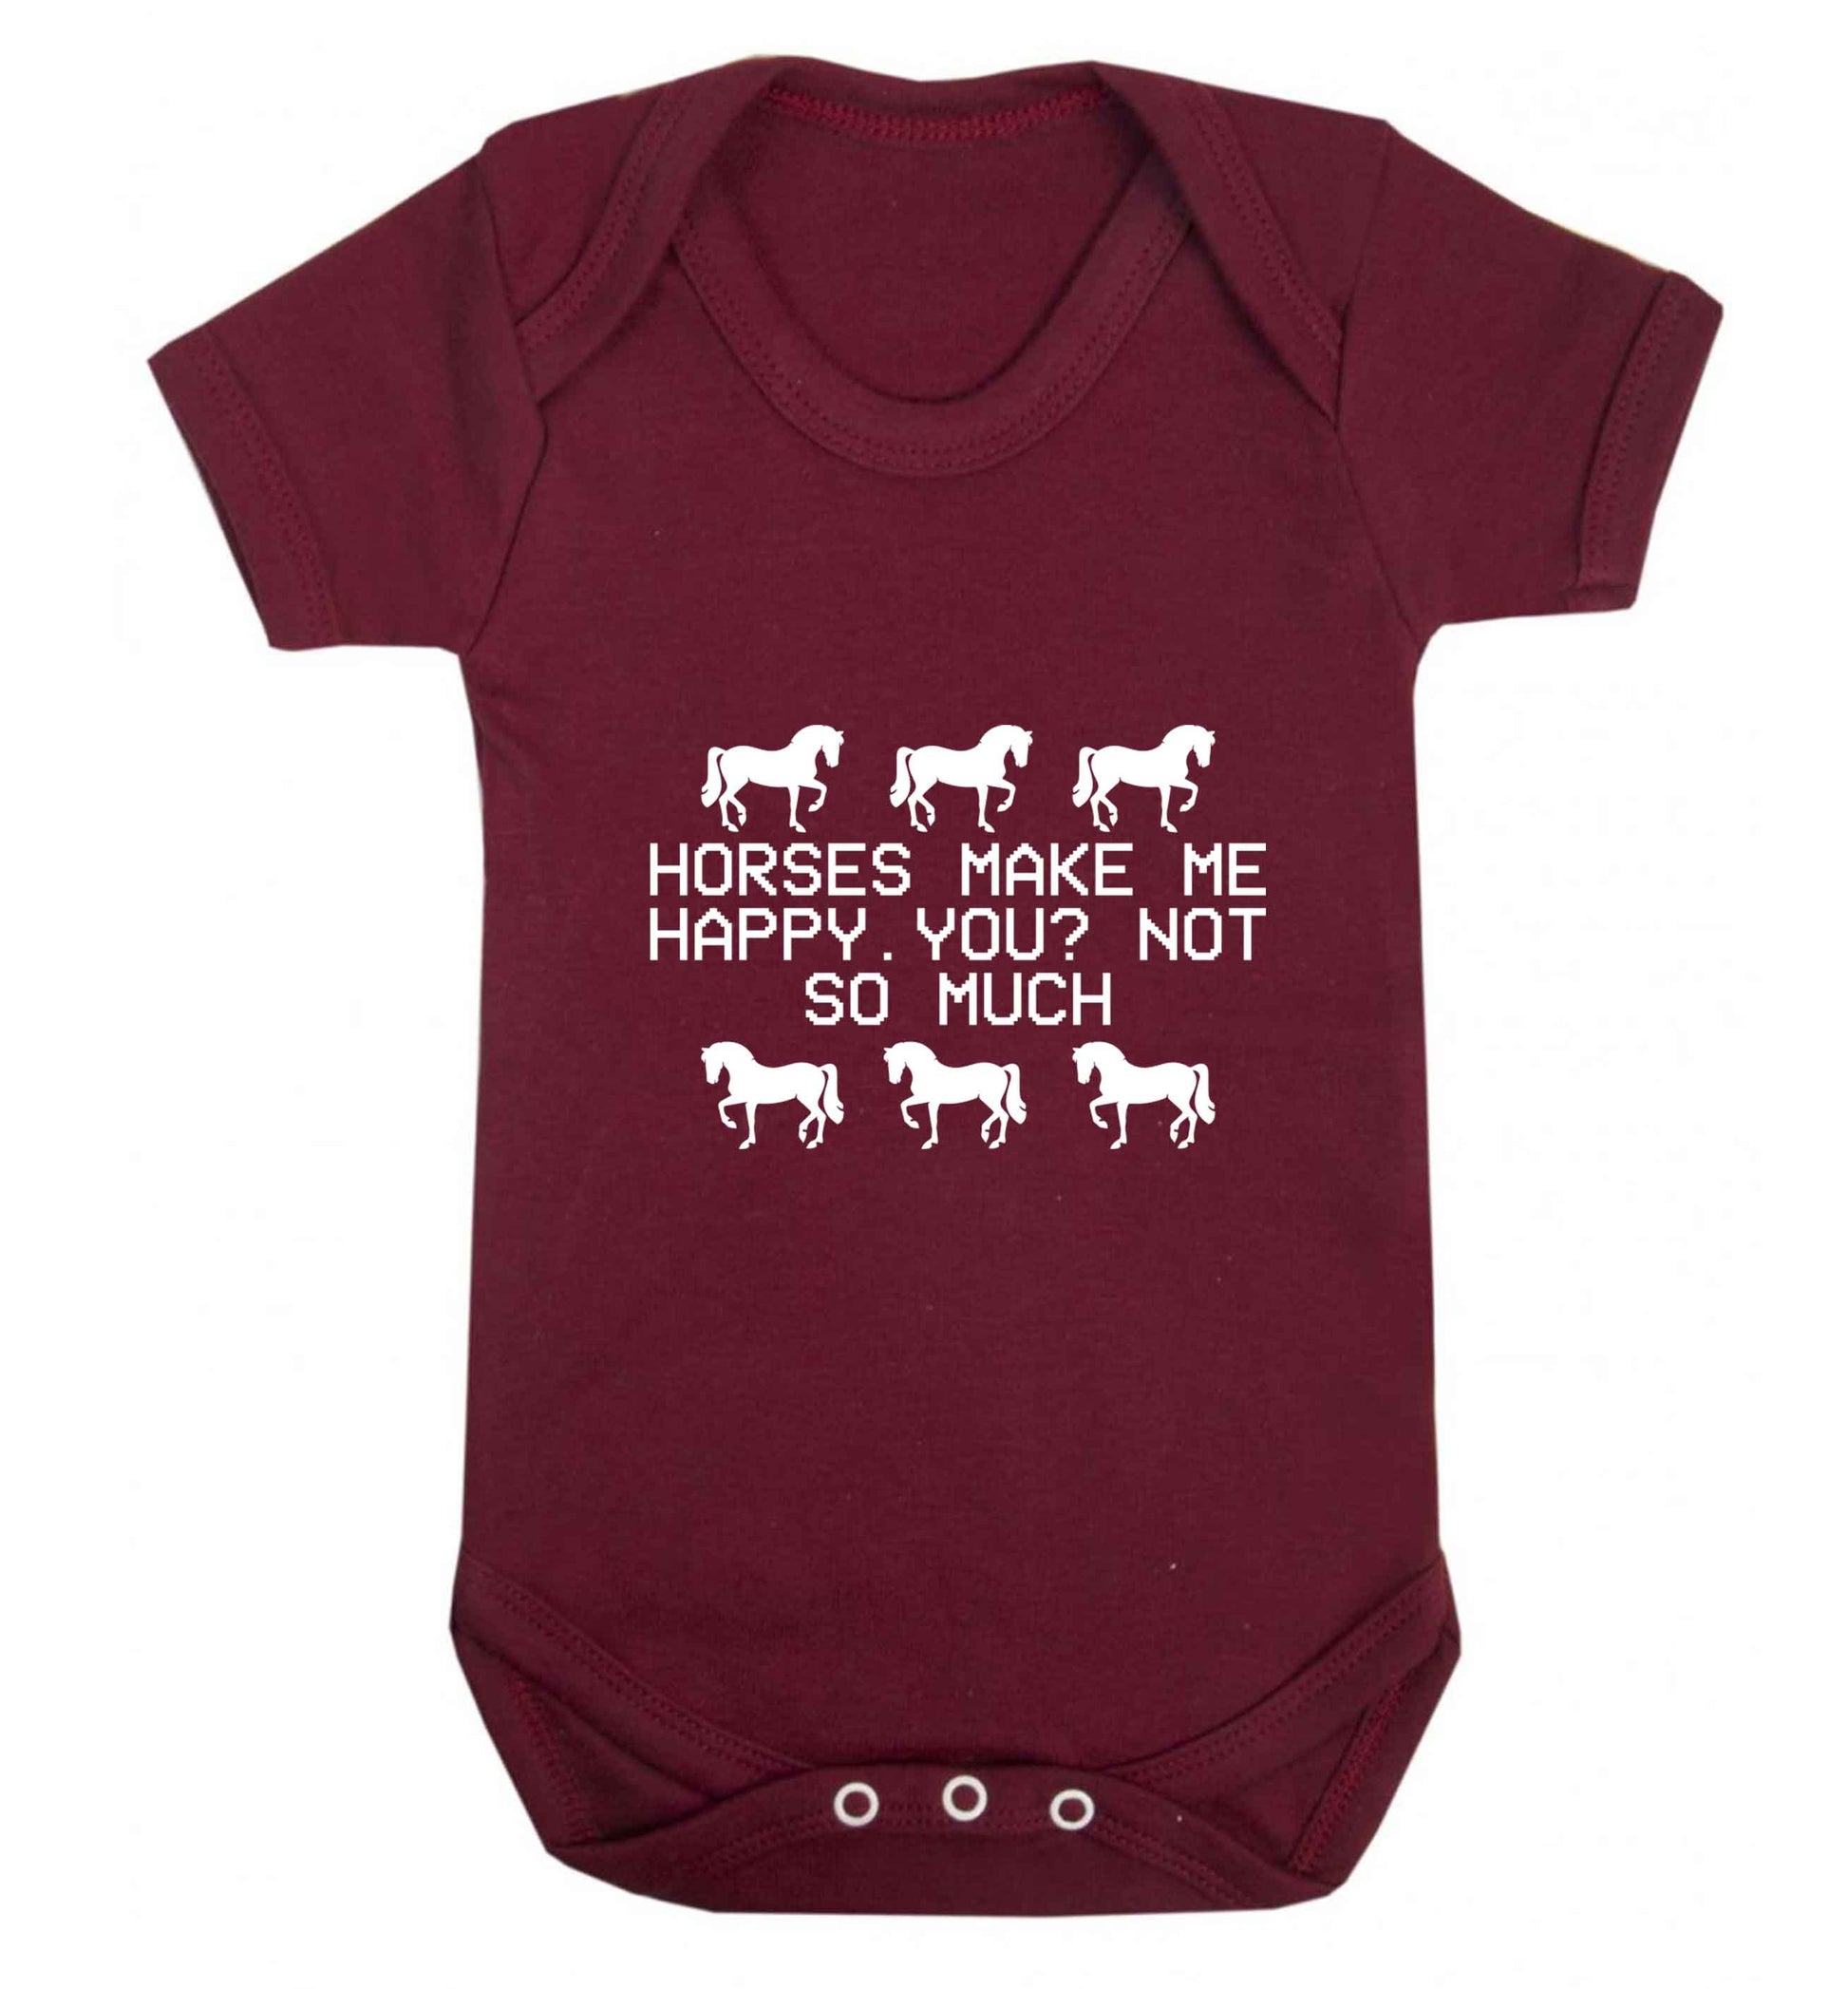 Horses make me happy, you not so much baby vest maroon 18-24 months